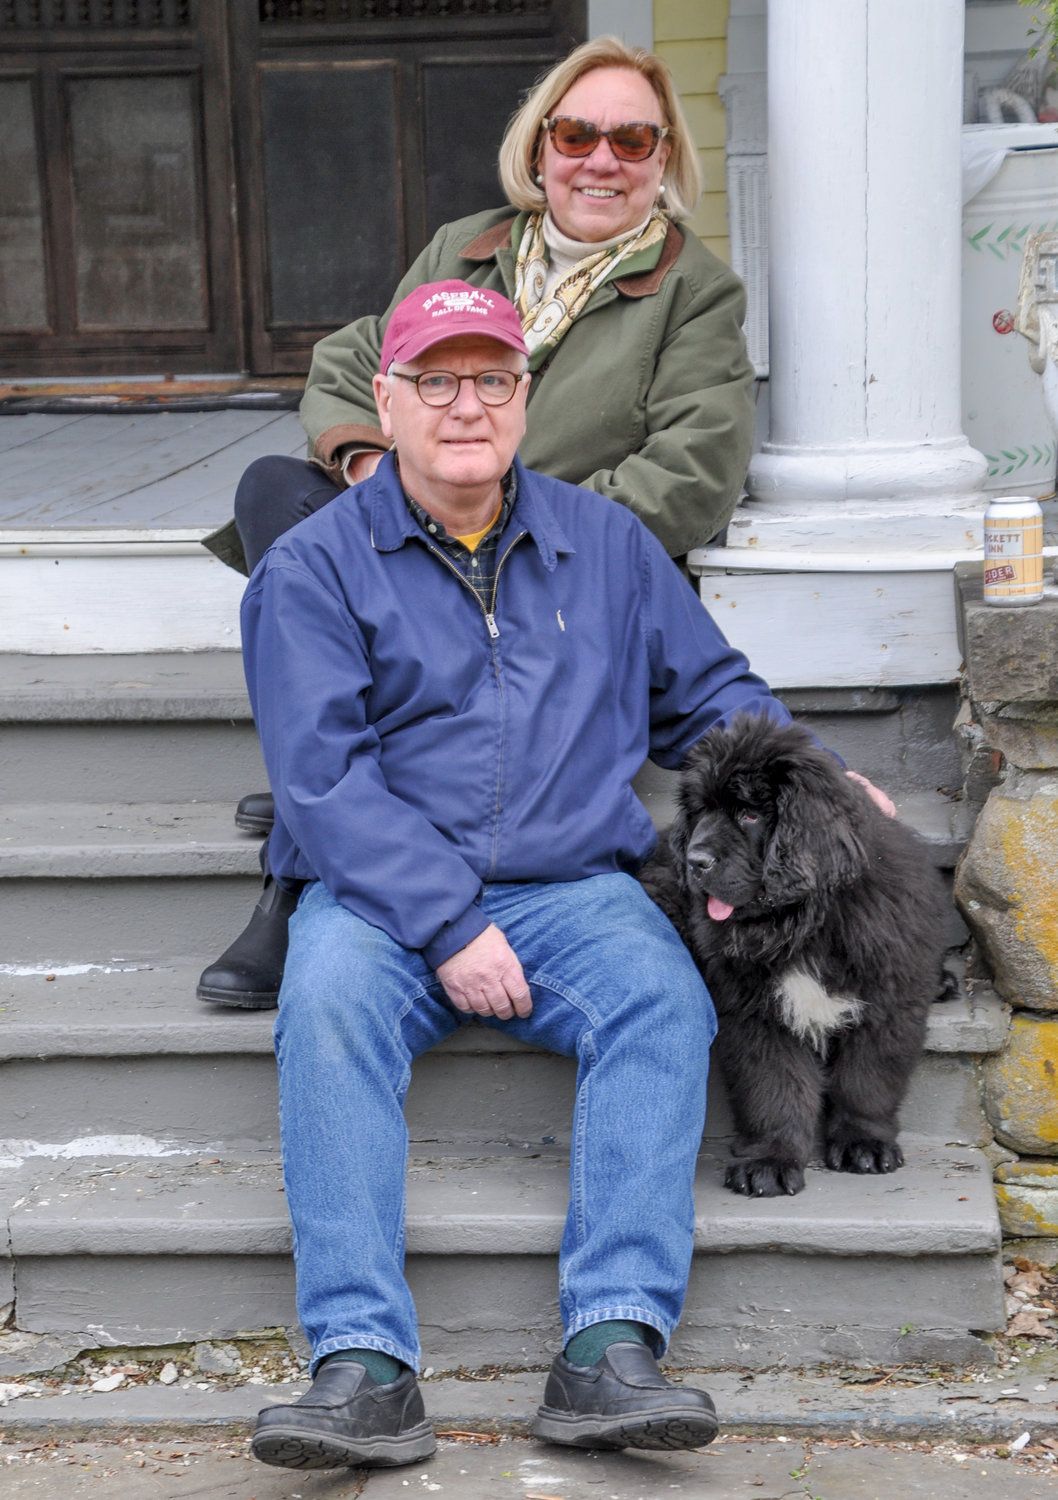 Barryville royalty—er, I mean John and Debra Conway—introduced Dharma the Wonder Dog to their gorgeous new puppy, Quillan. Oh, right. I was there too.